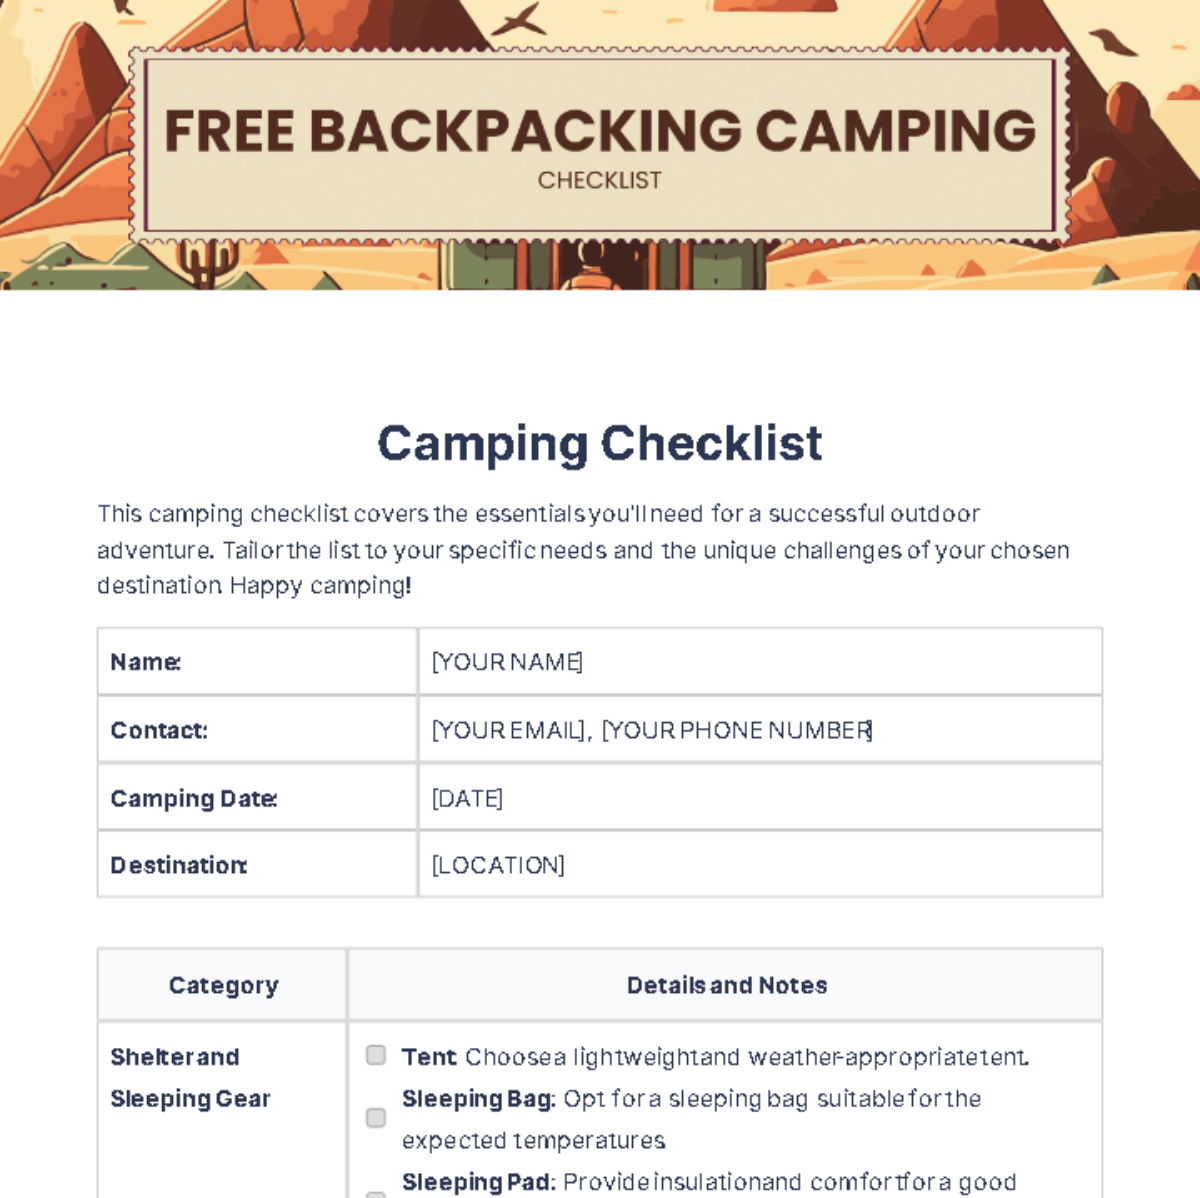 Free Backpacking Camping Checklist Template